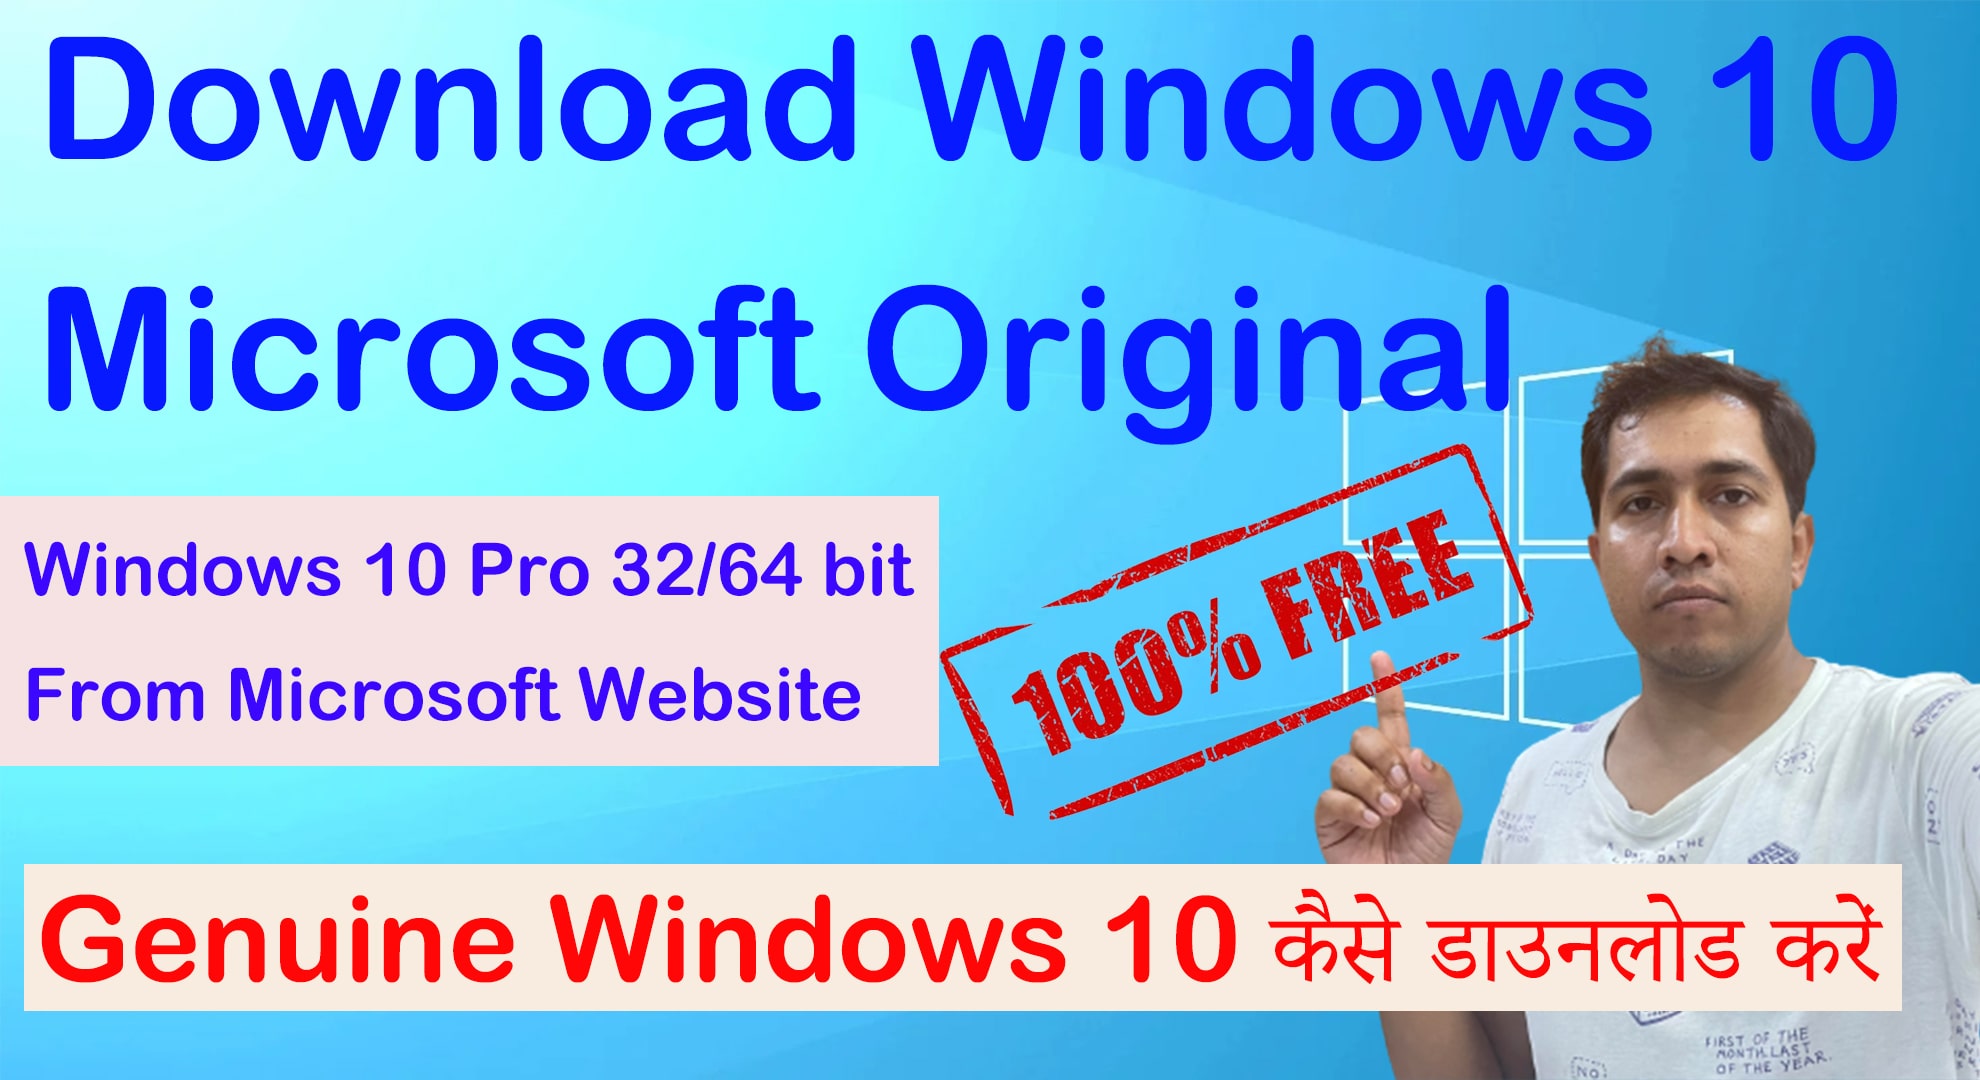 How to Download Full version Free Windows 10 from Microsoft official website (Video Demonstration Included)